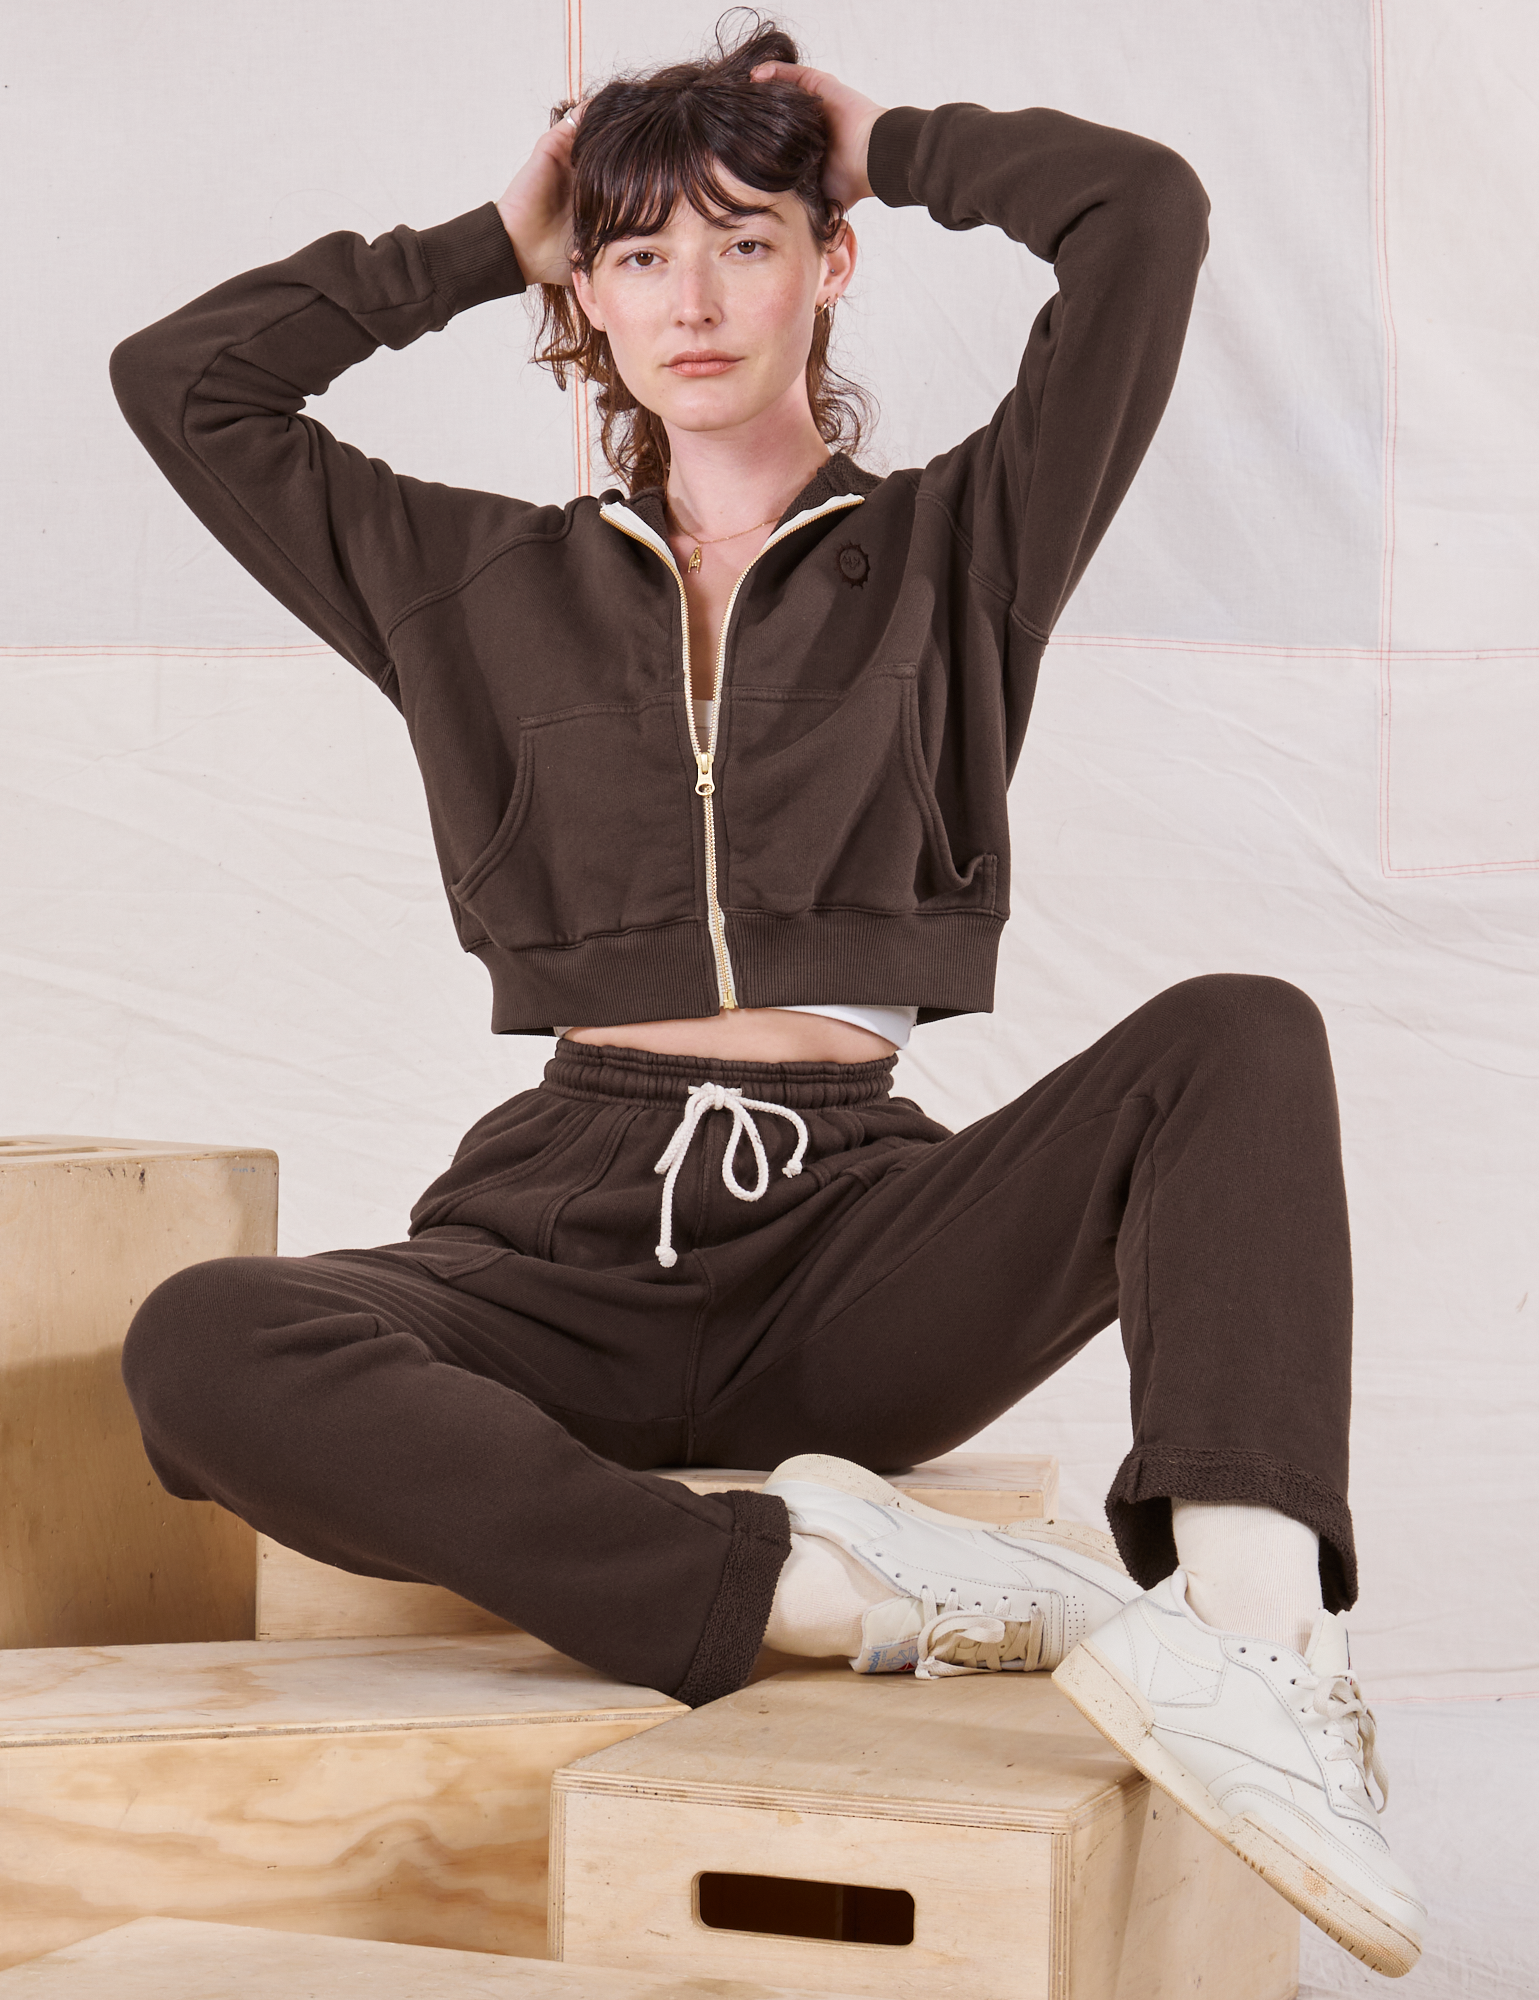 Alex is wearing Cropped Zip Hoodie in Espresso Brown and matching Rolled Cuff Sweat Pants